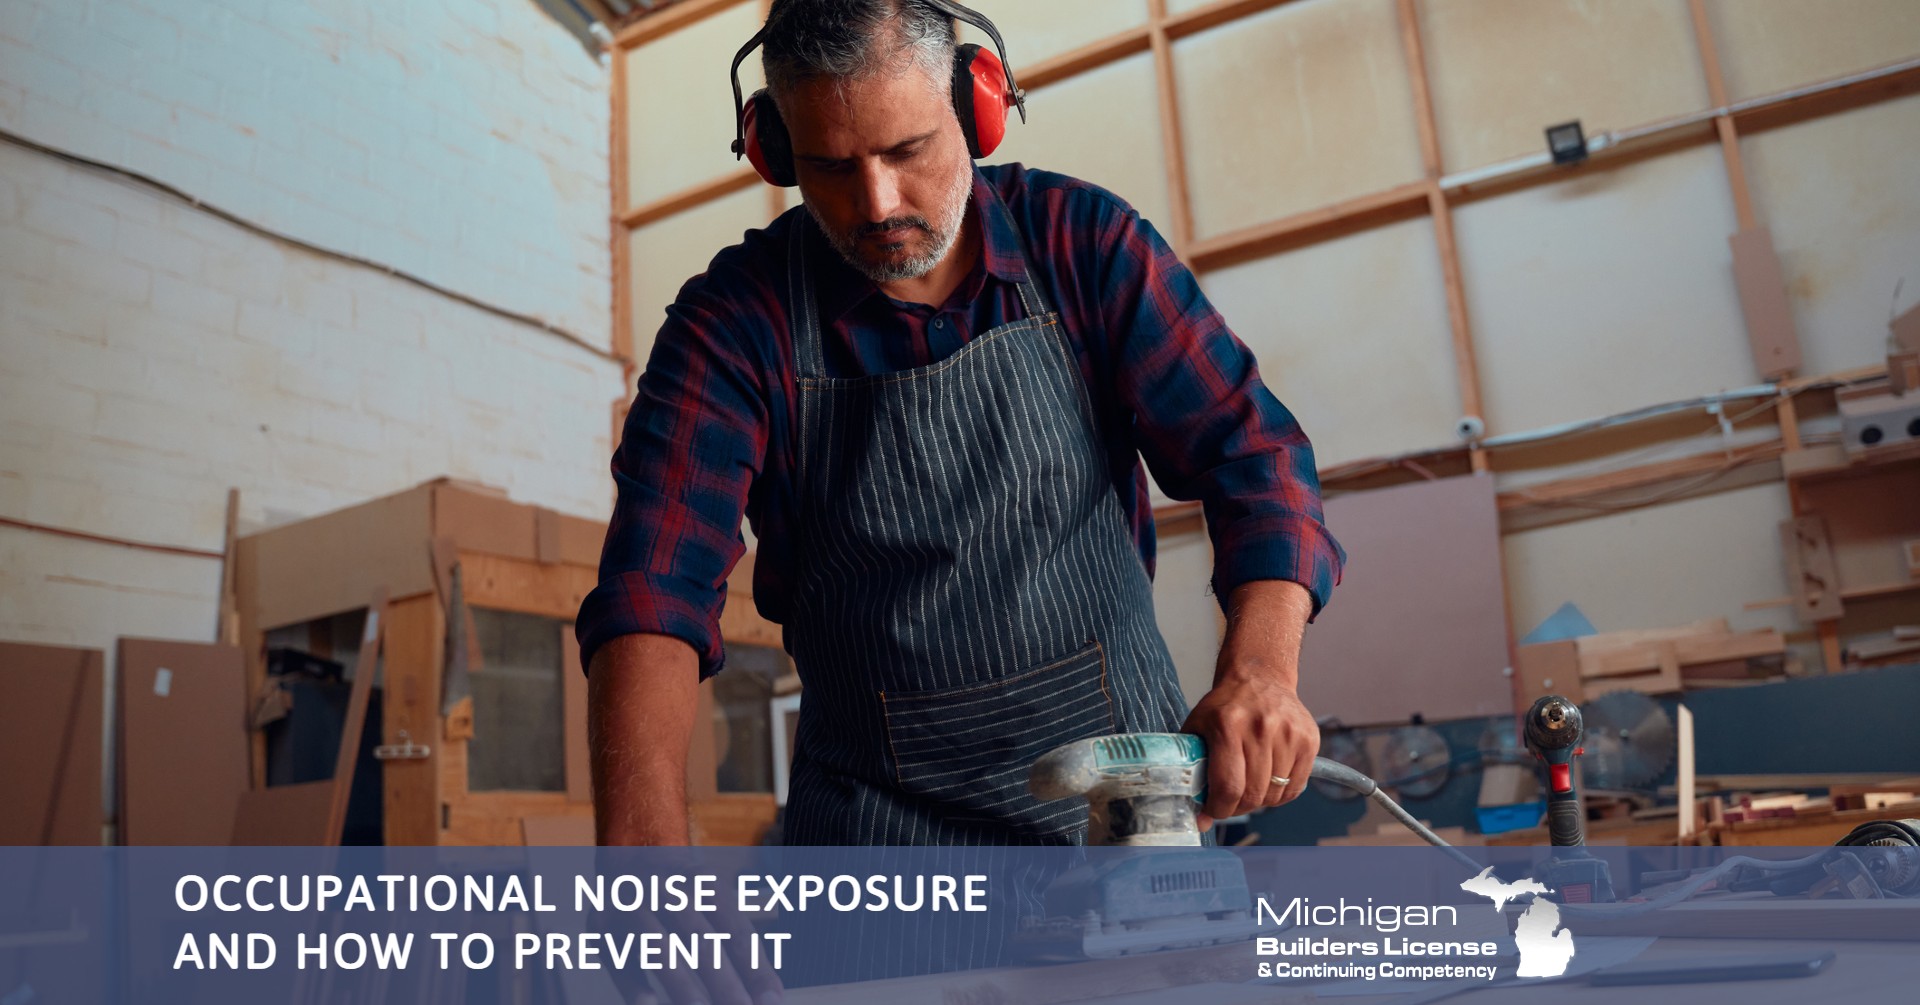 Occupational Noise Exposure and How to Prevent It